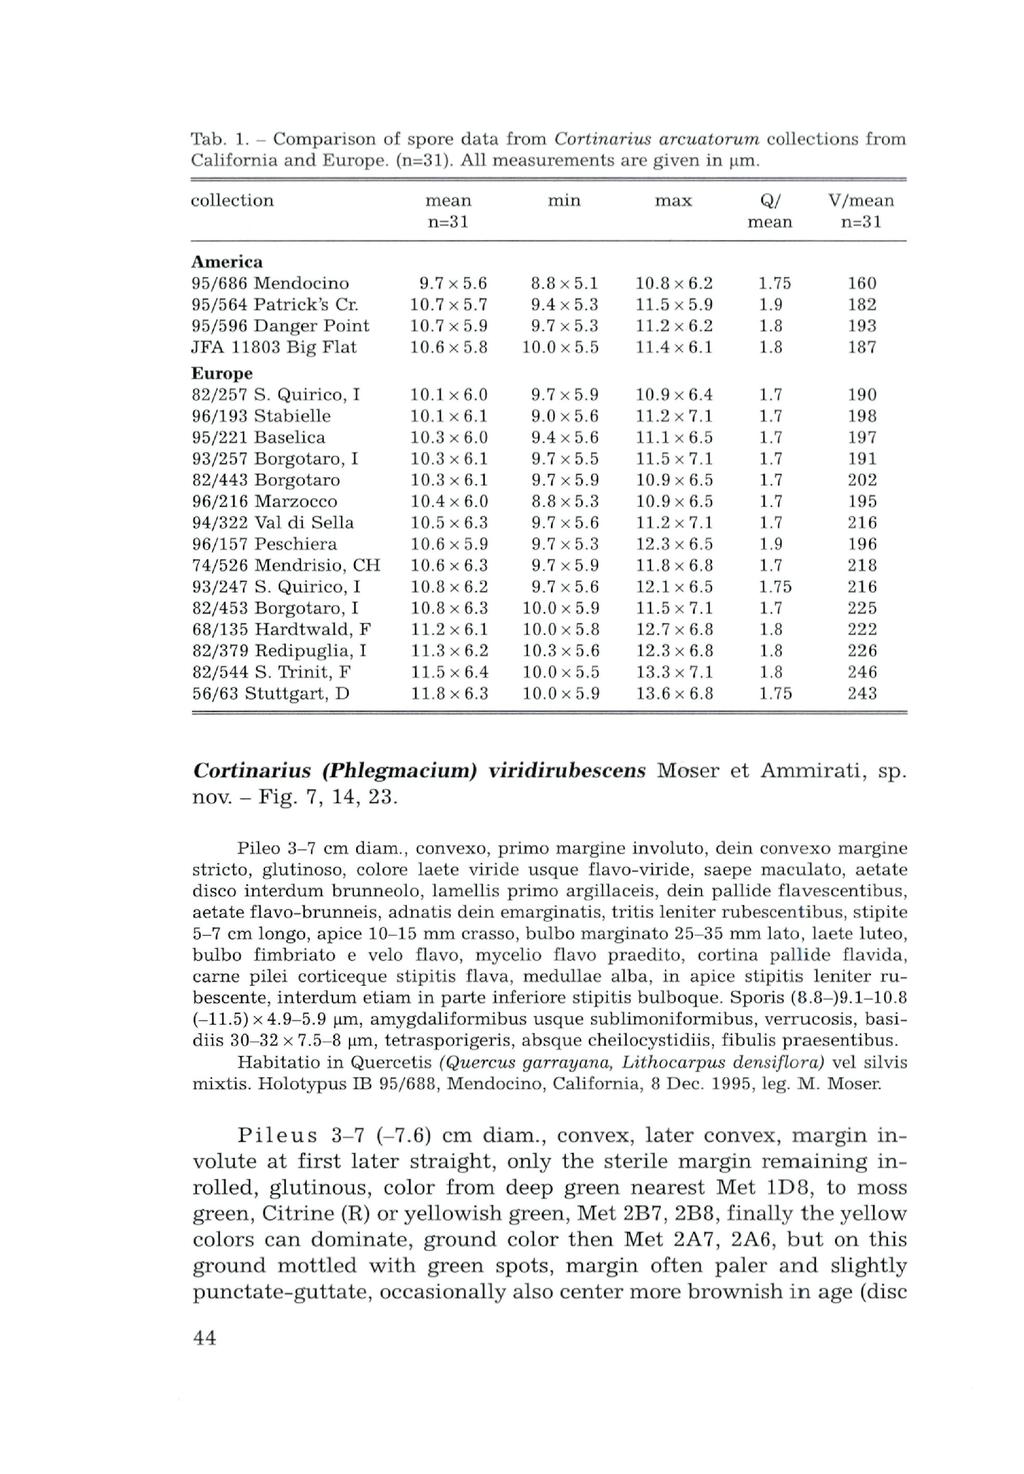 Tab. 1. - Comparison of spore data from Cortinarius arcualorum collections from California and Europe. (n=31). All measurements are given in urn.